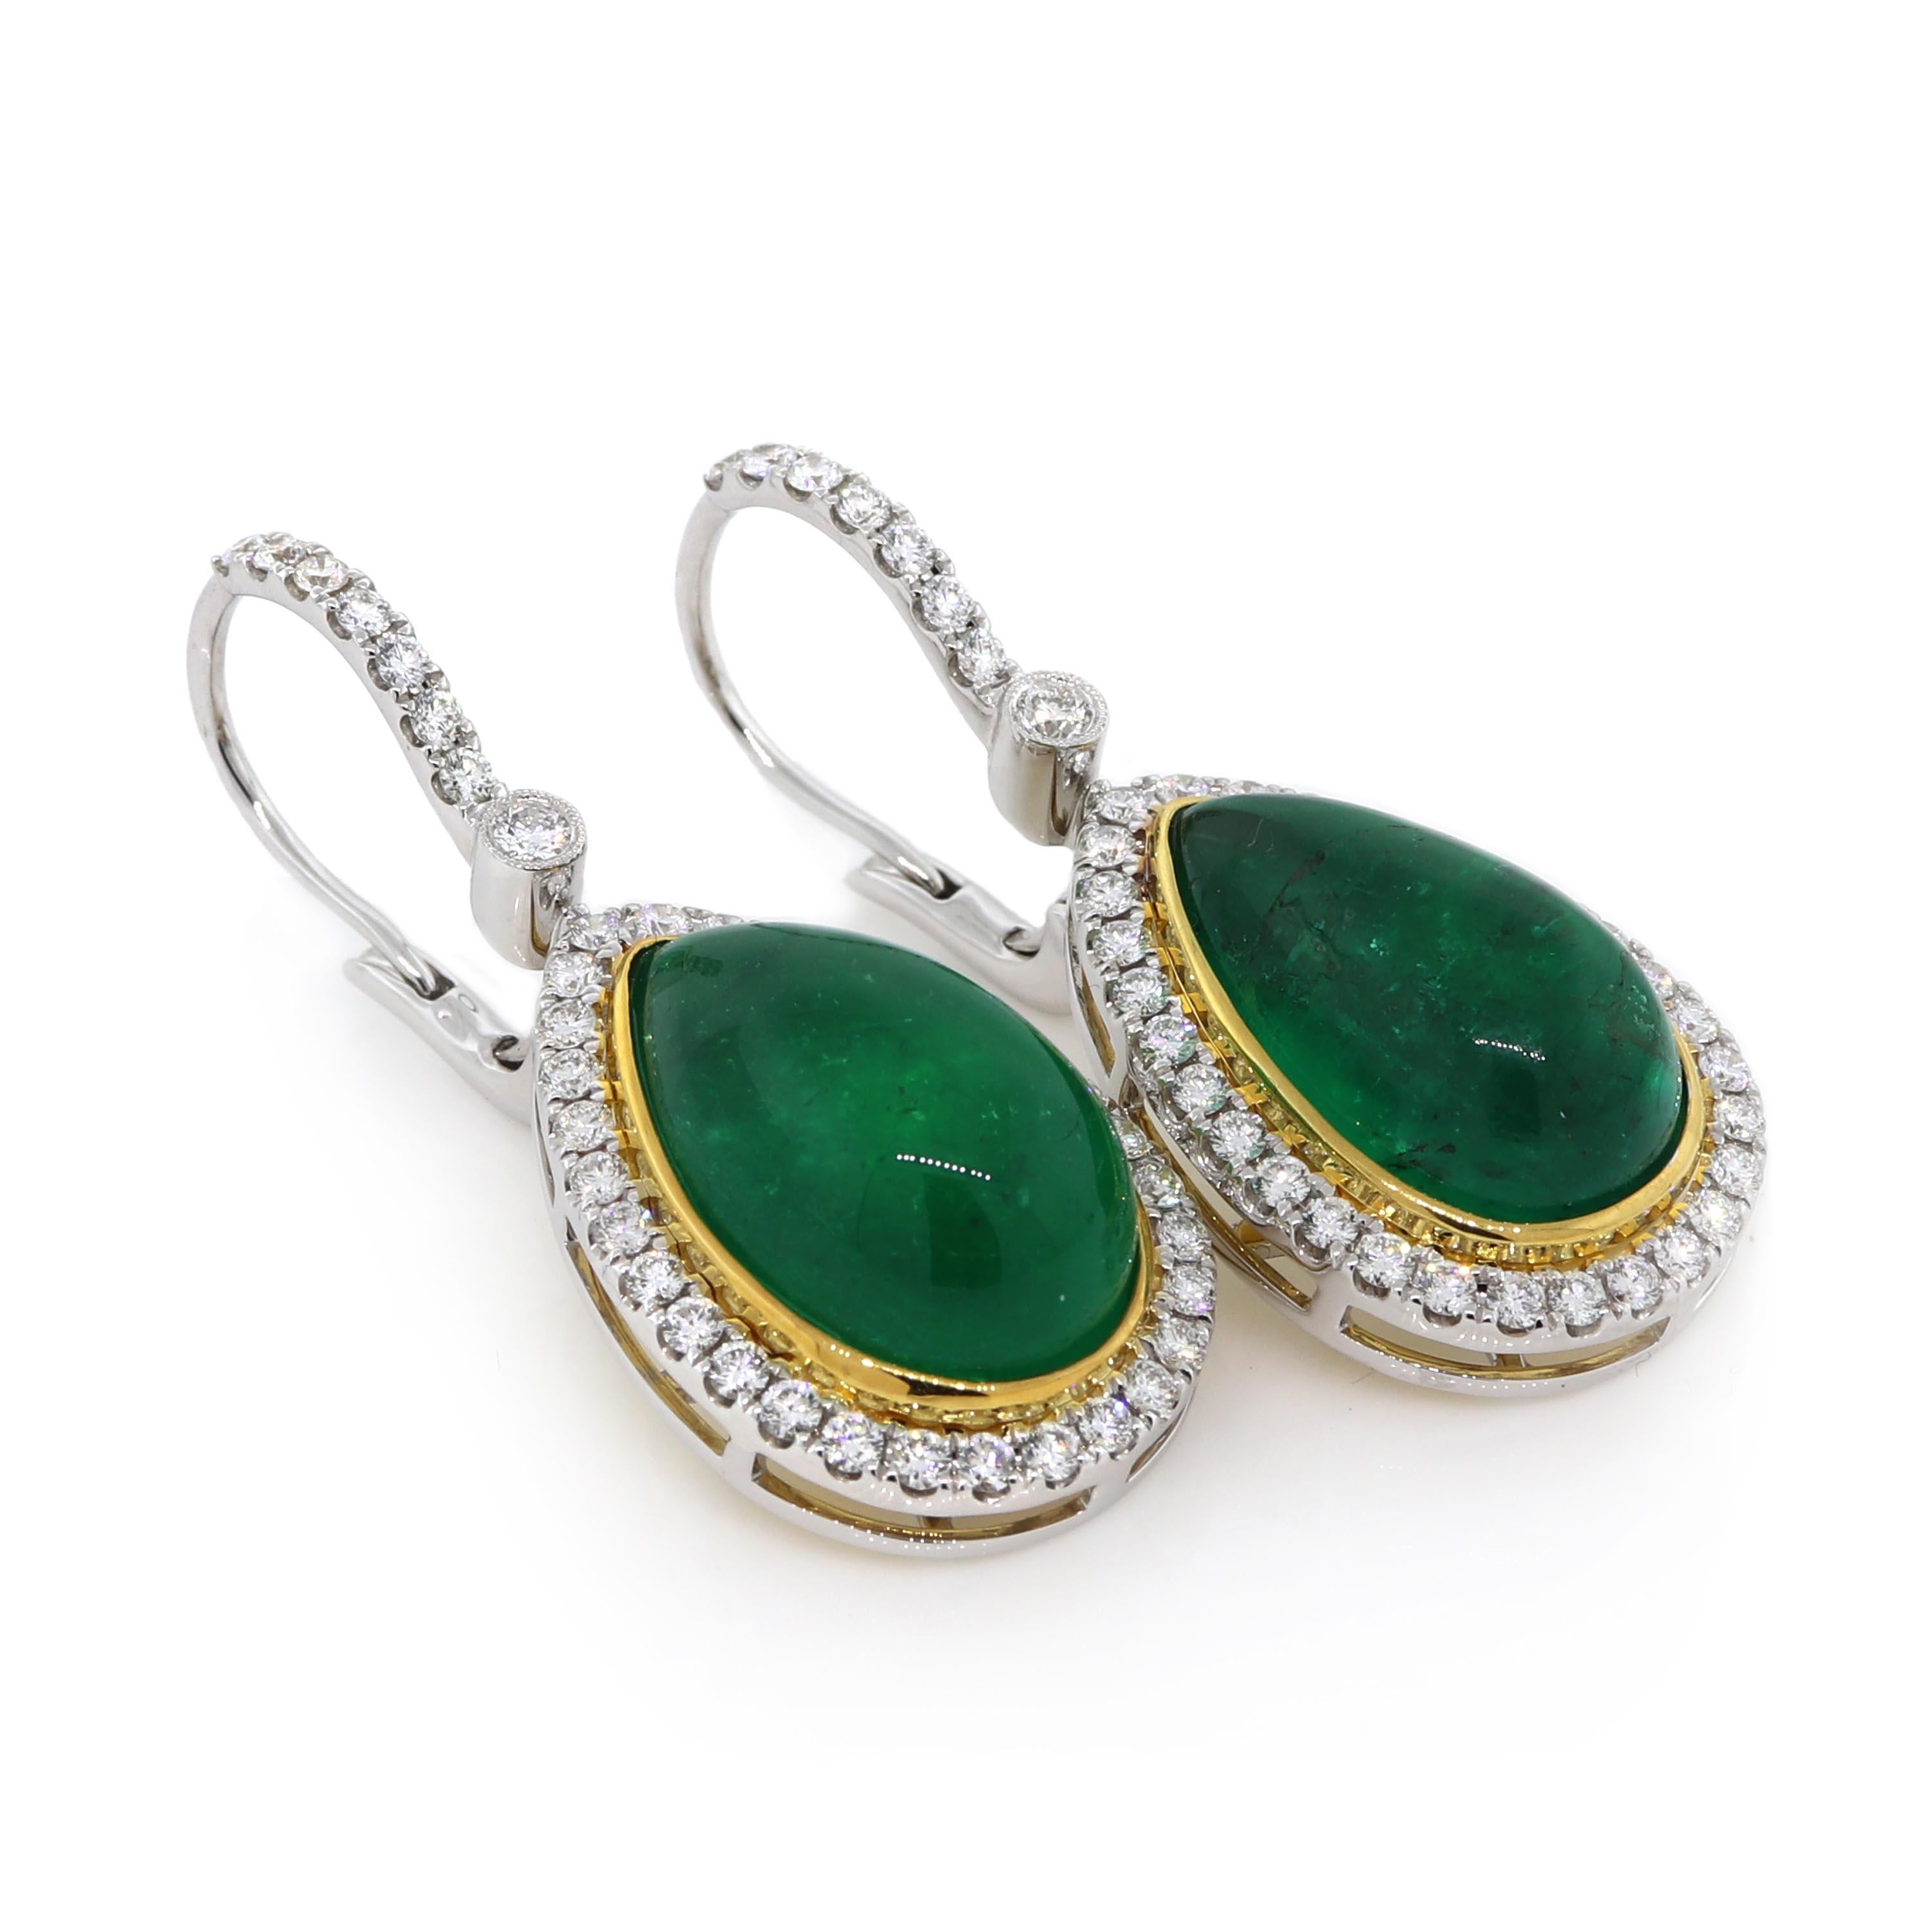 2 GIA certified cabochon pear shape emeralds of about 24.35 carats surrounded by 76 round brilliant cut diamonds of about 1.44 carats with a clarity of SI and color G. All stones are set in an 18k two tone earrings. The total weight of the earrings